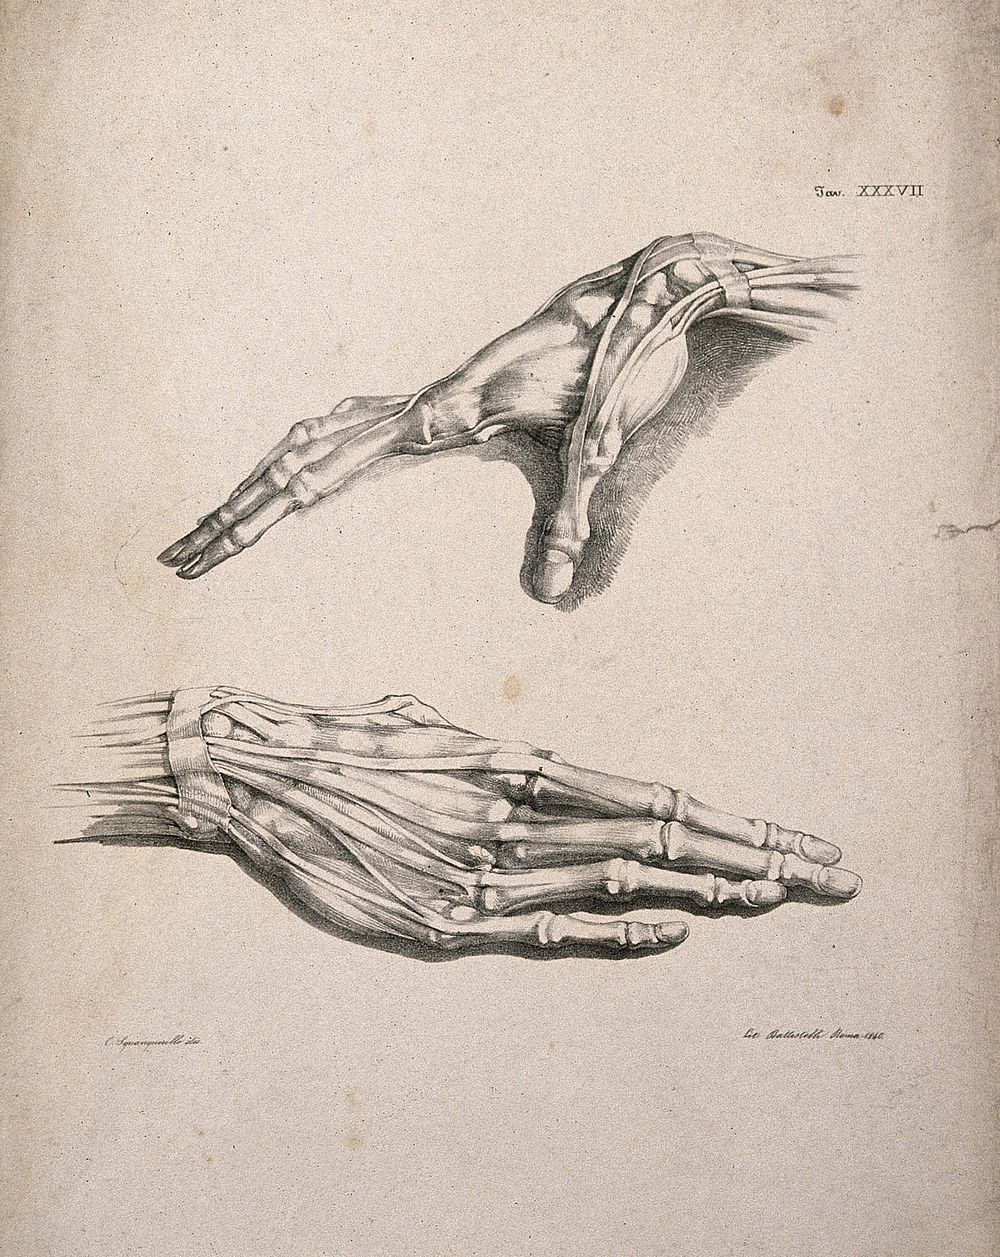 Muscles and tendons of the hand: two figures of écorché hands. Lithograph by Battistelli after C. Squanquerillo, 1840.